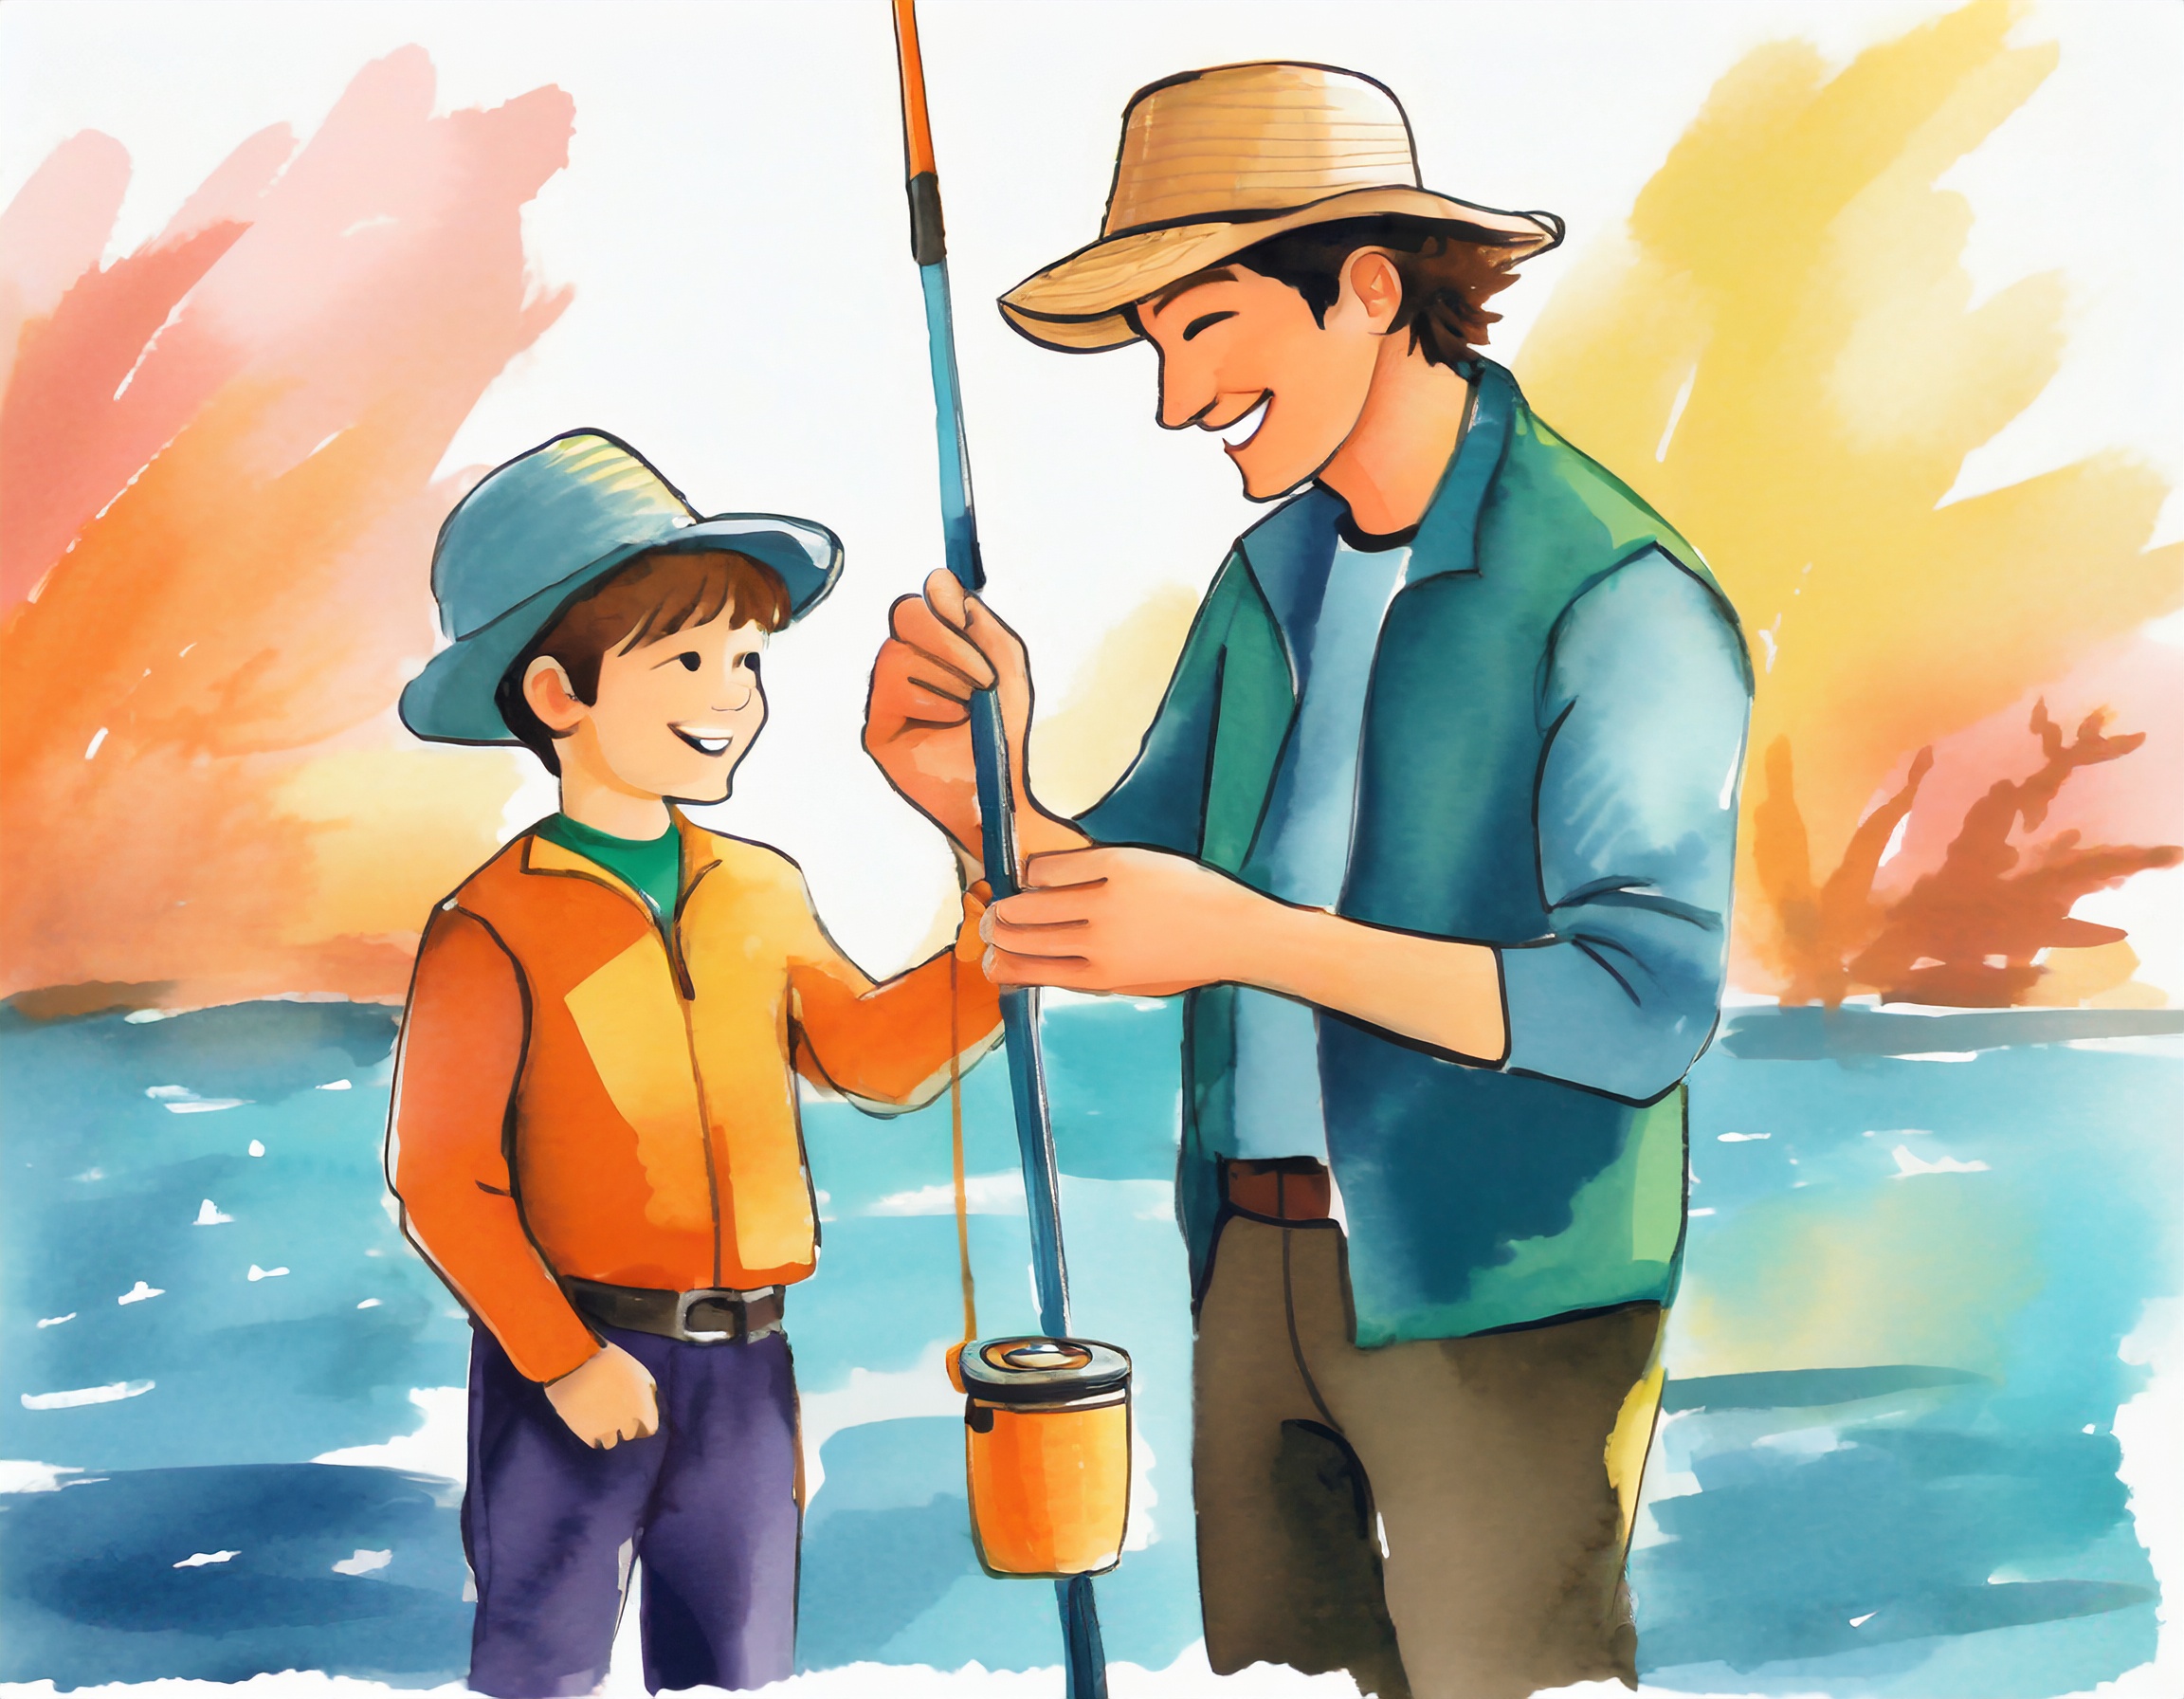 a painting of a man teaching a young boy how to fish with his rod and reel